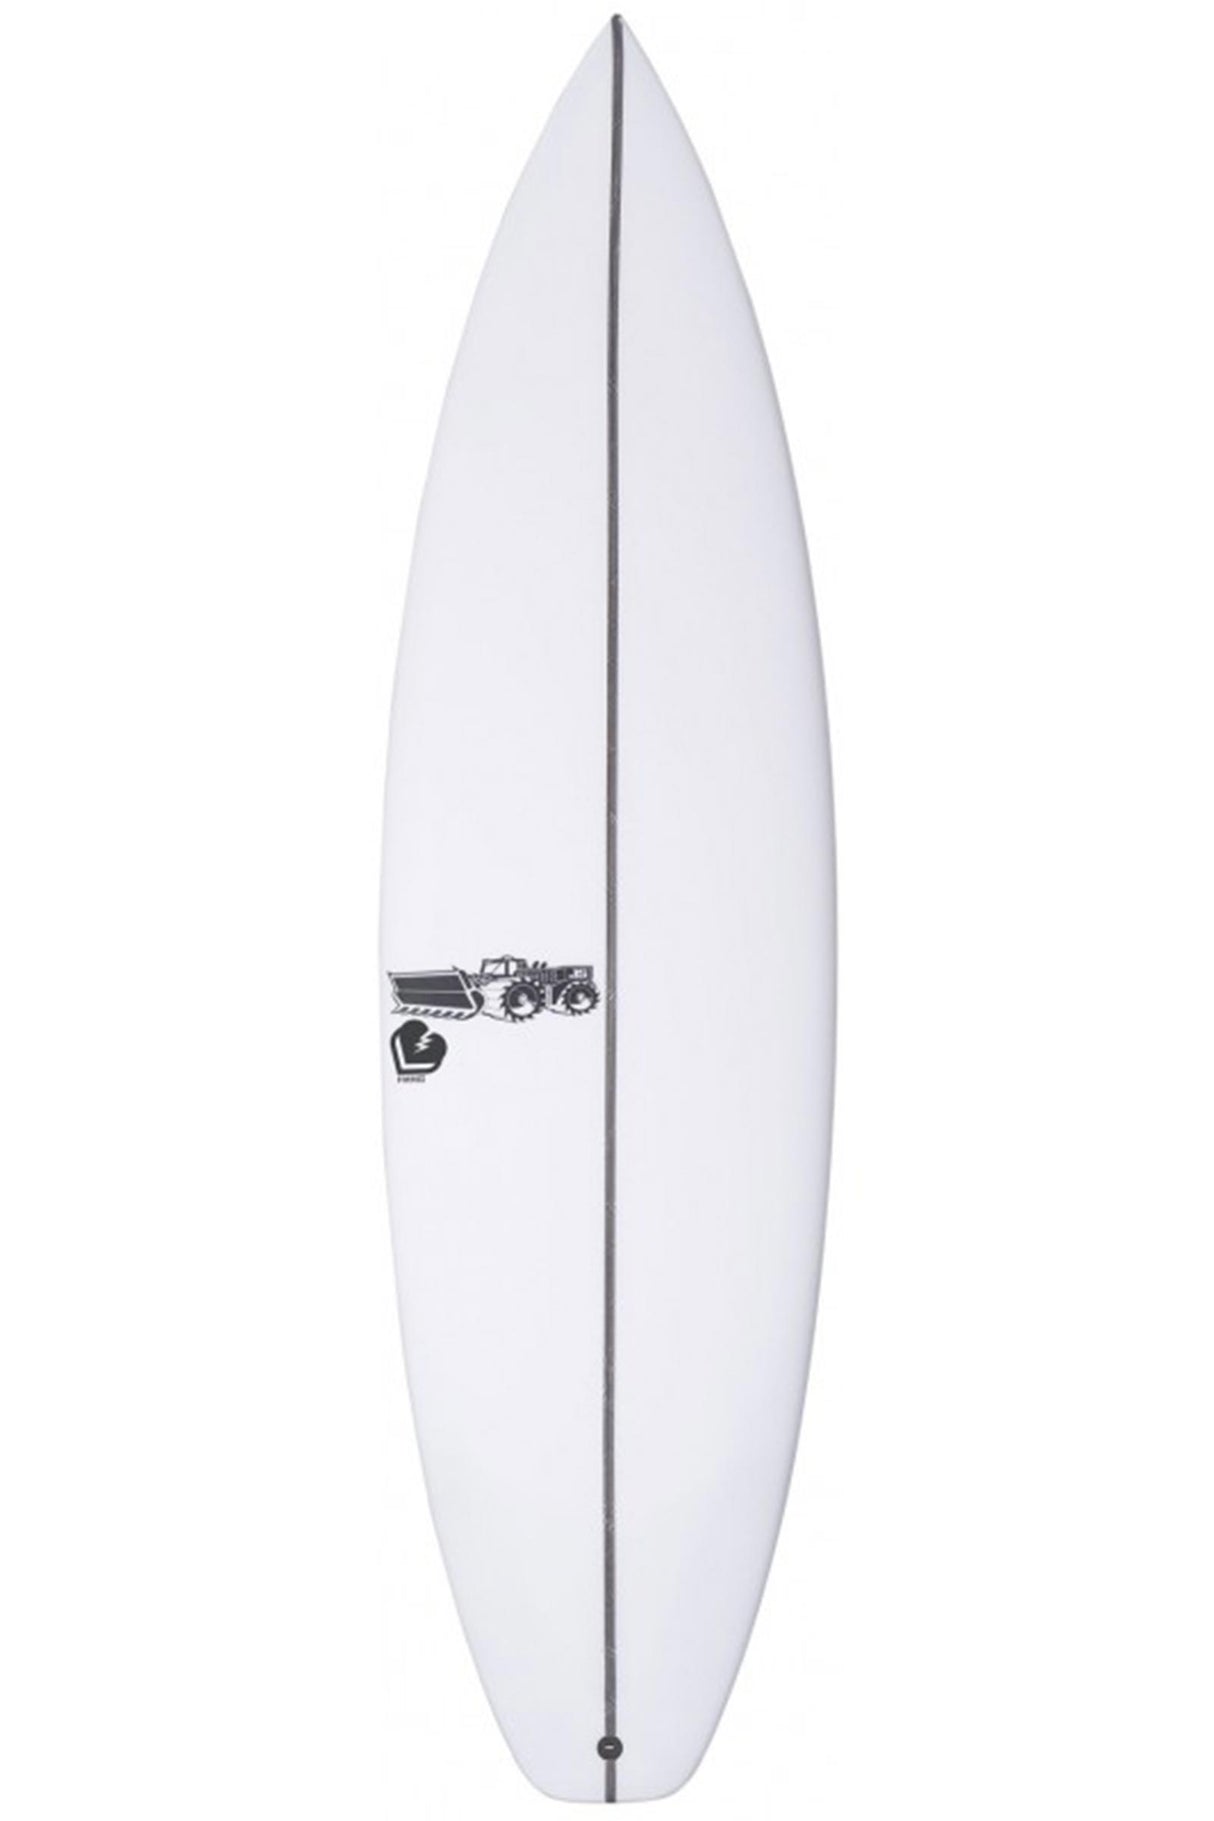 JS Industries Forget Me Not II Squash Tail Surfboard